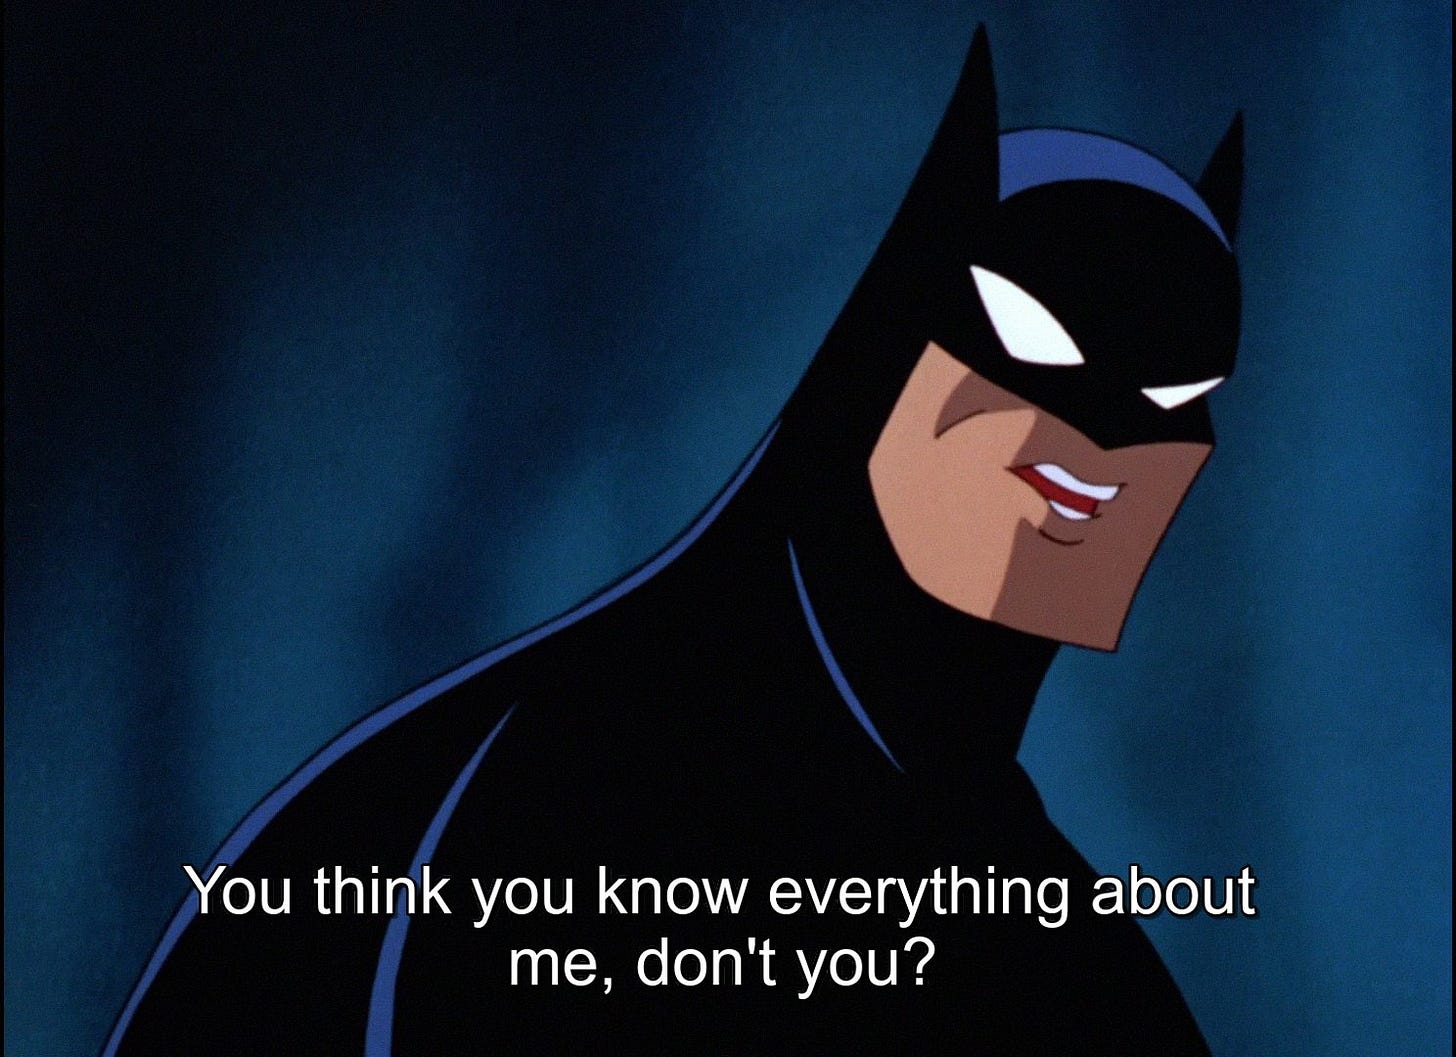 Batman as voiced by Kevin Conroy saying the line "You think you know everything about me, don't you?"